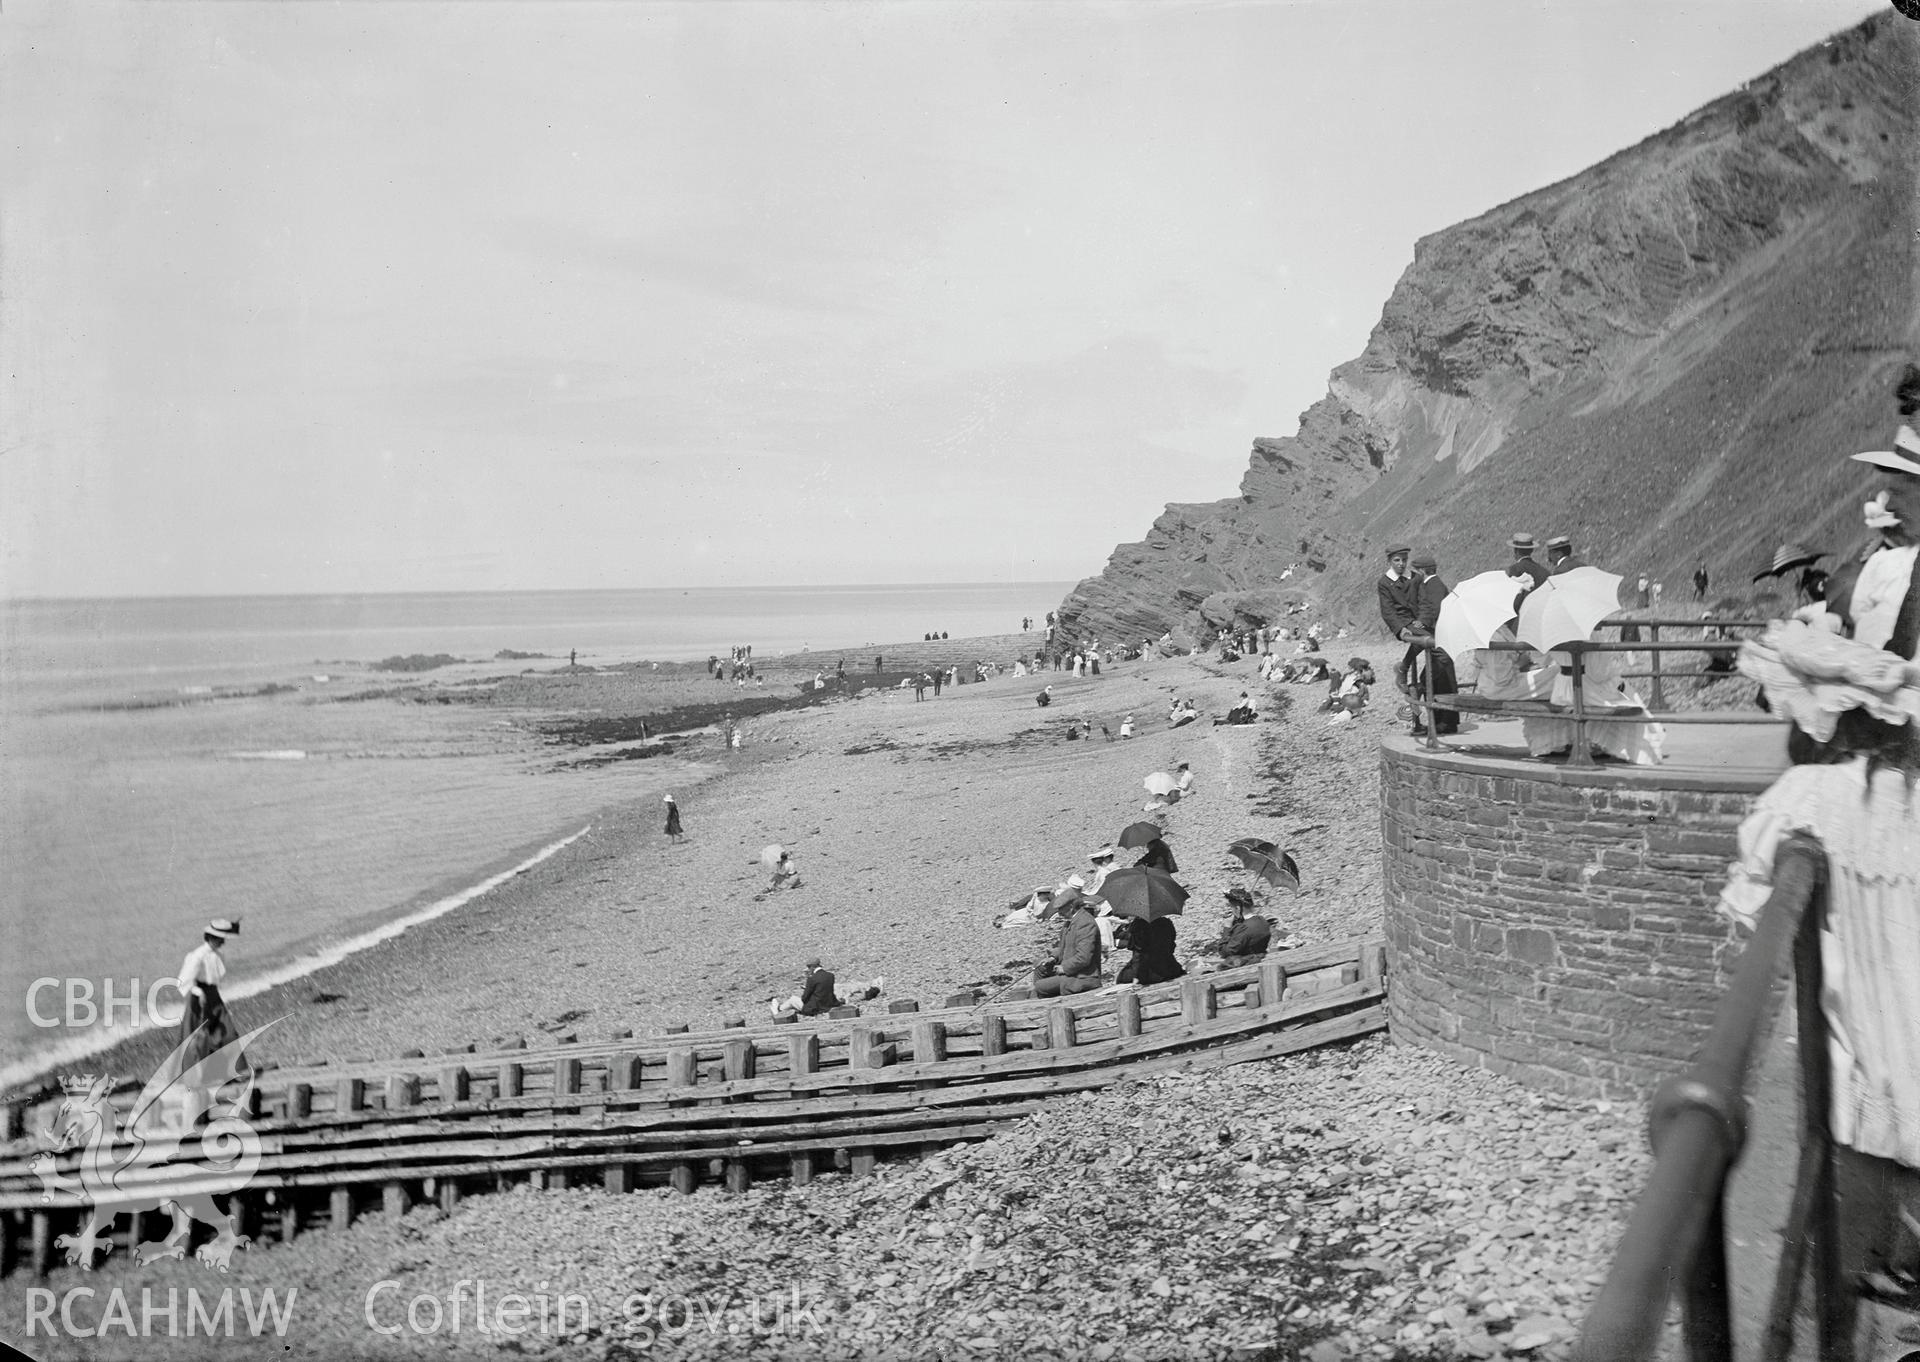 Black and white image dating from c.1910 showing the beach at the Constitution Hill end of the Promenade,  taken by Emile T. Evans.